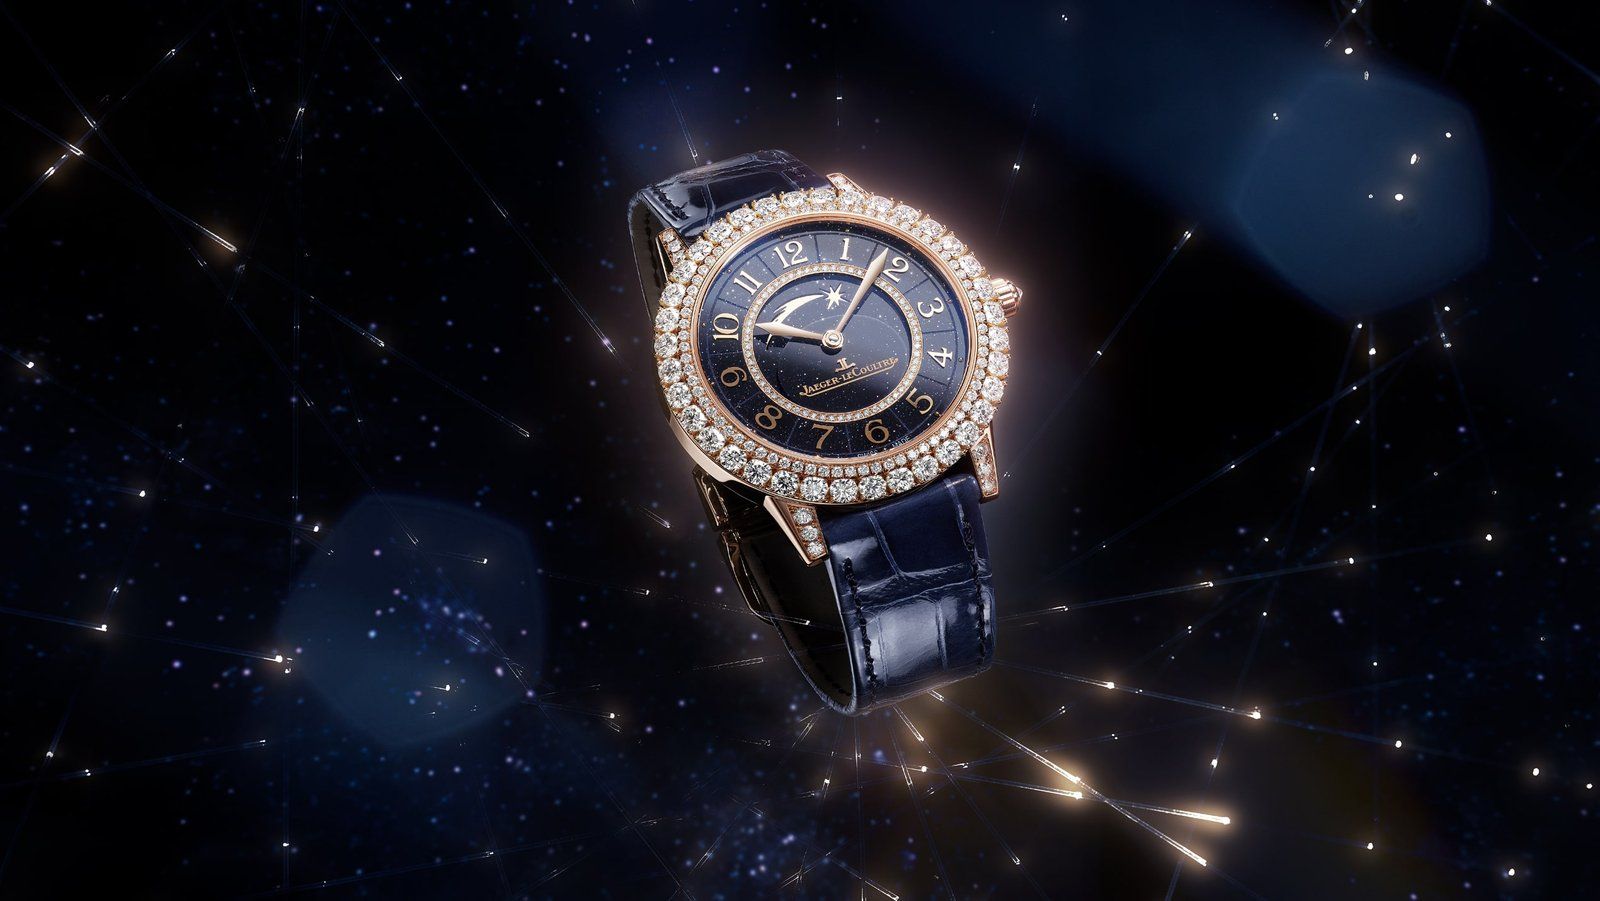 Jaeger-LeCoultre Rendez-Vous Dazzling Star with a shooting star complication